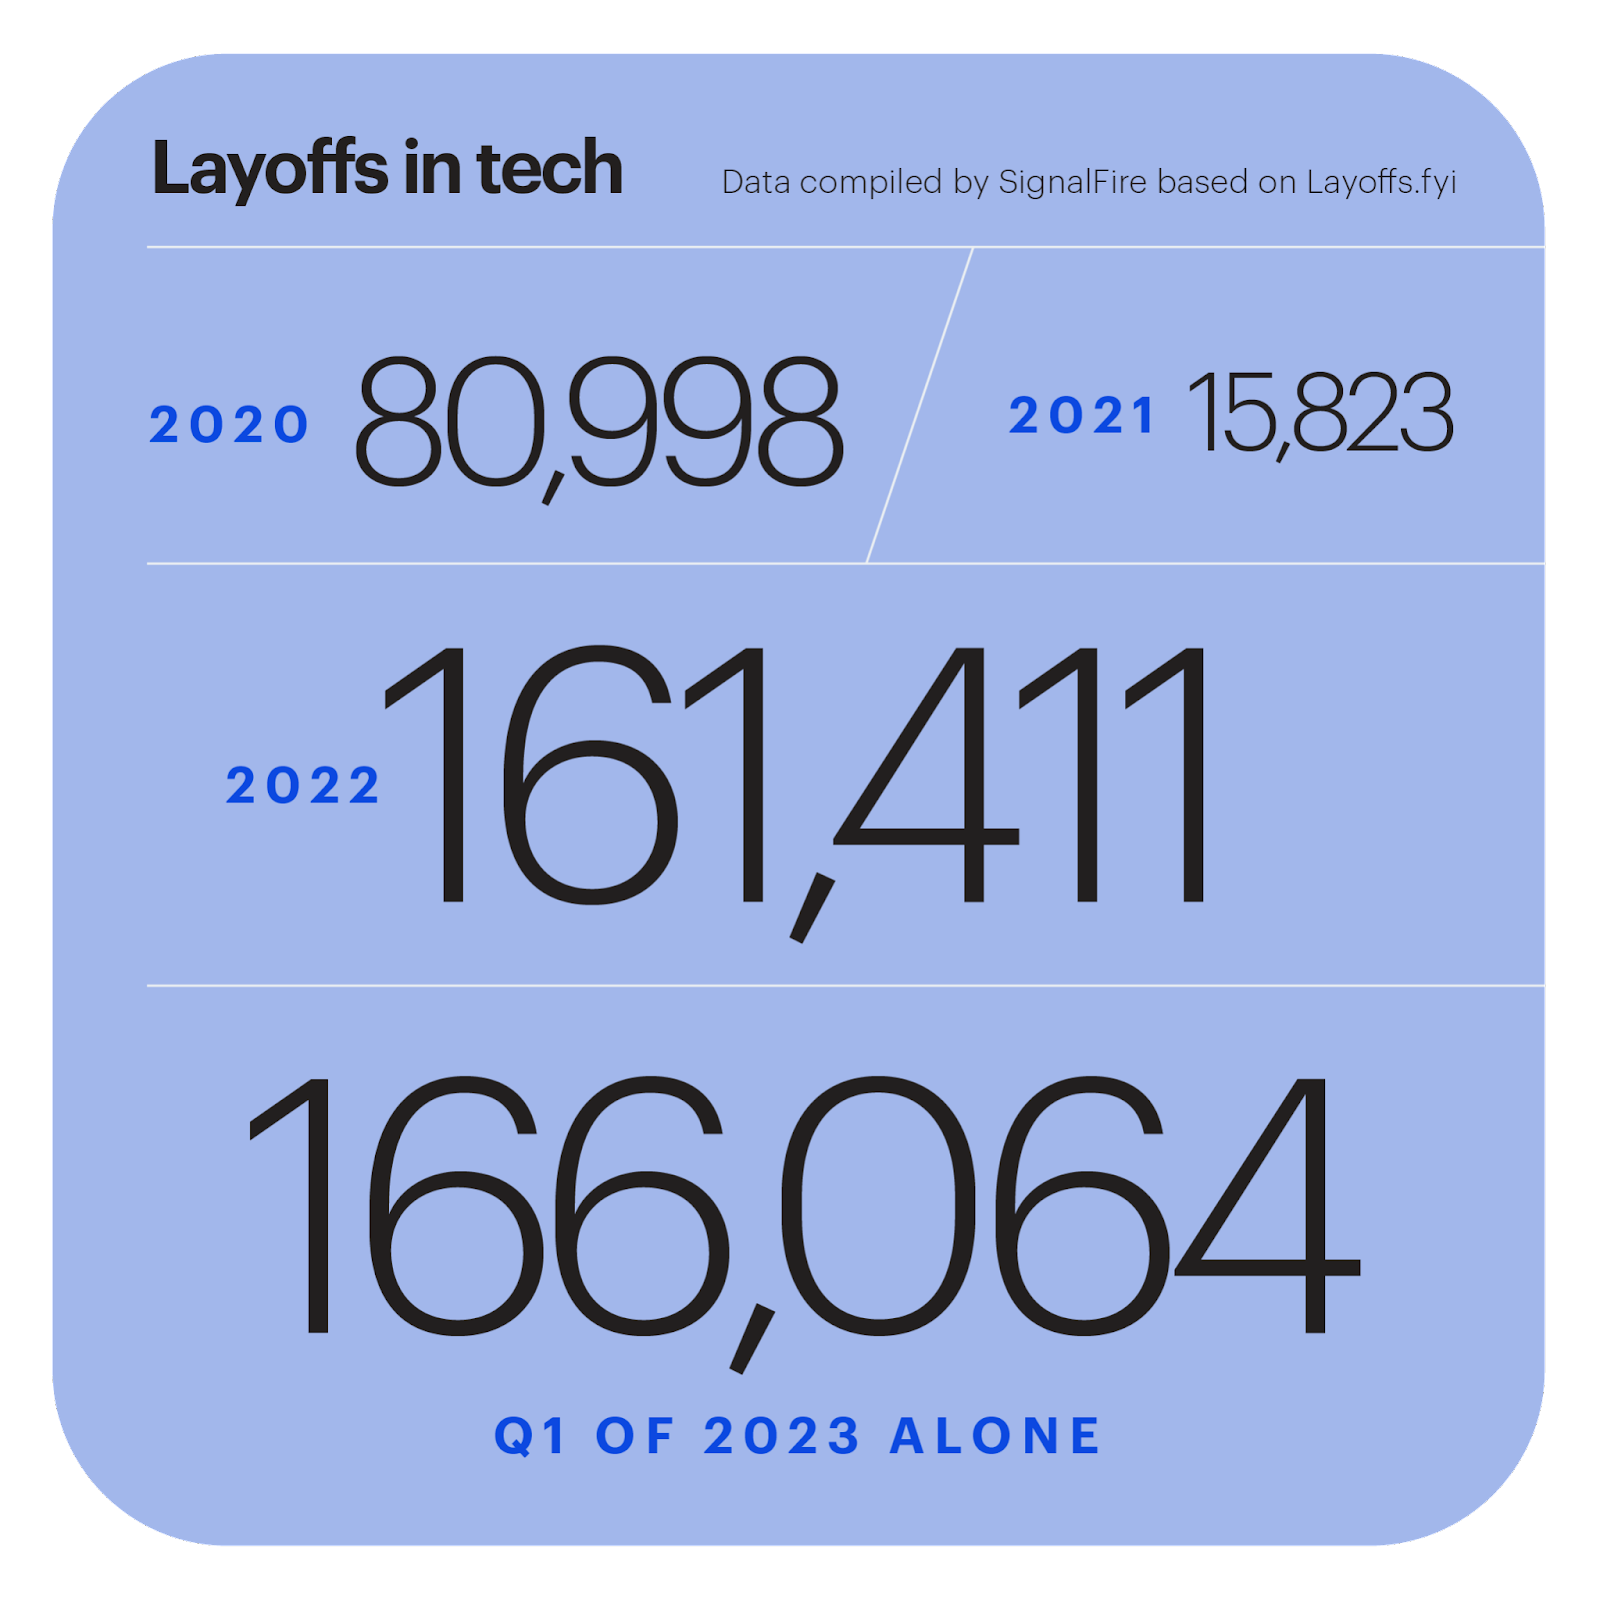 Layoffs in tech - data compiled by SignalFire based on Layoffs.fyi